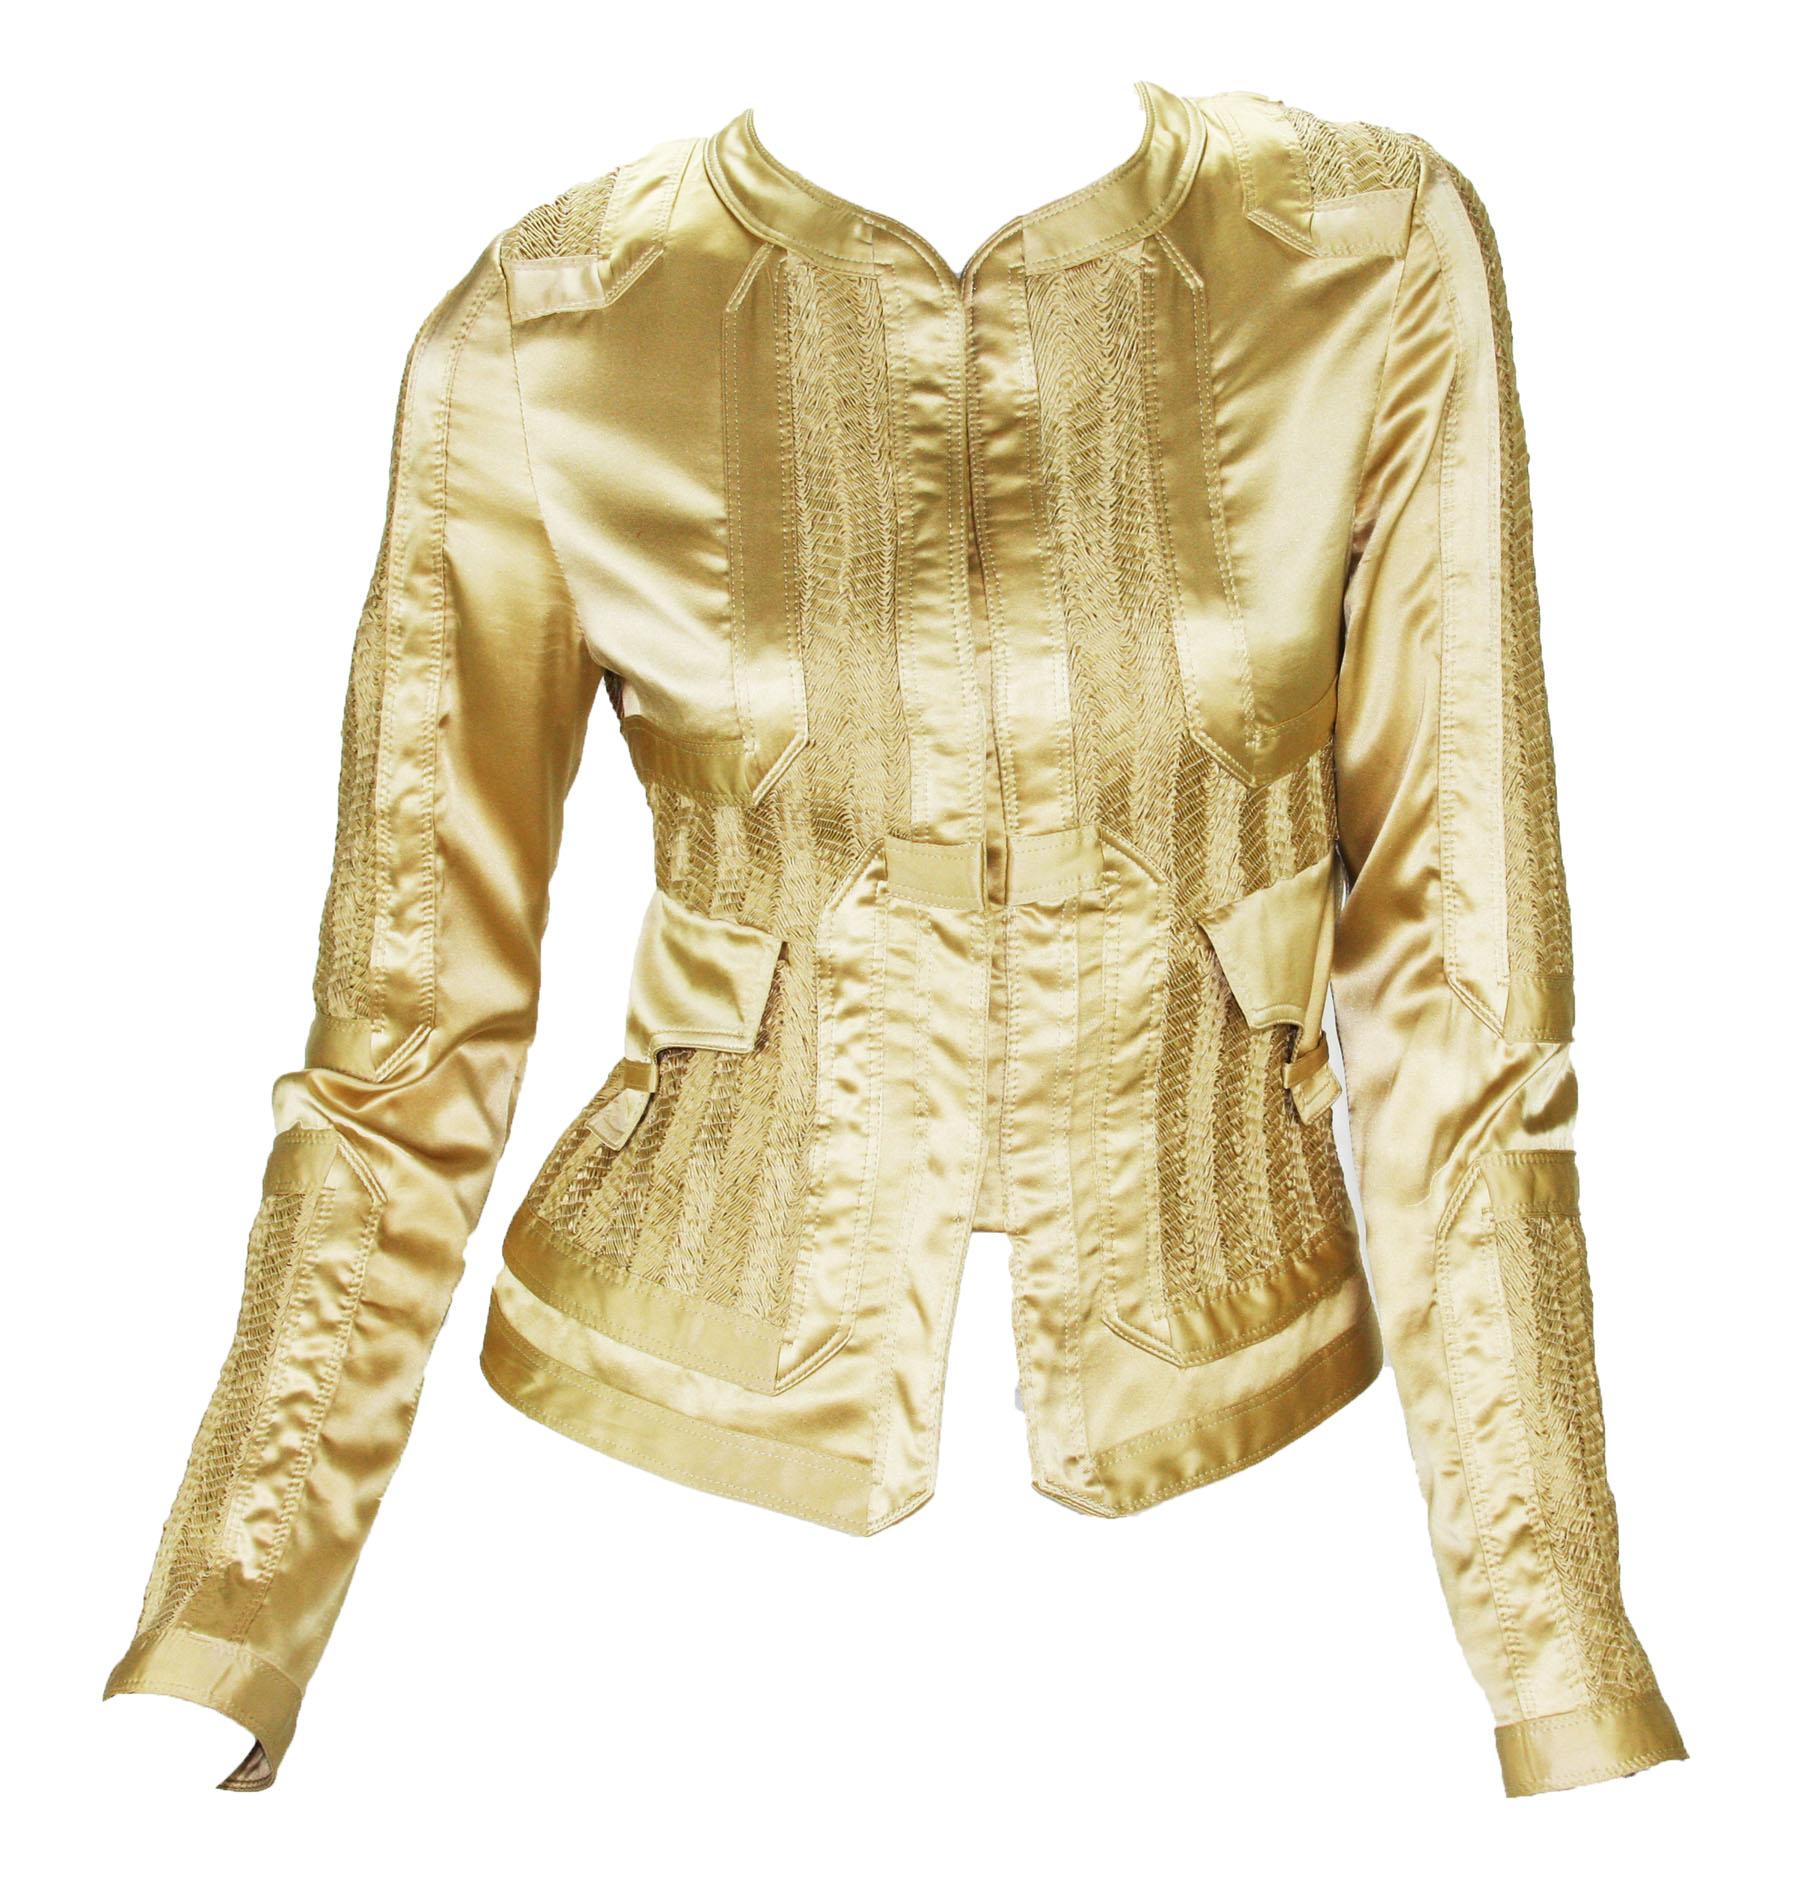 Tom Ford for Gucci Silk Gold Dress Limited Edition Jacket
2004 Collection
Designer size 40
Gold Silk Very Rare Jacket, Stretch Unique Insert Panels, Two Front Pockets ( still closed ), Hooks Closure at Front and Sleeves, Partly Lined. 
Measurements: